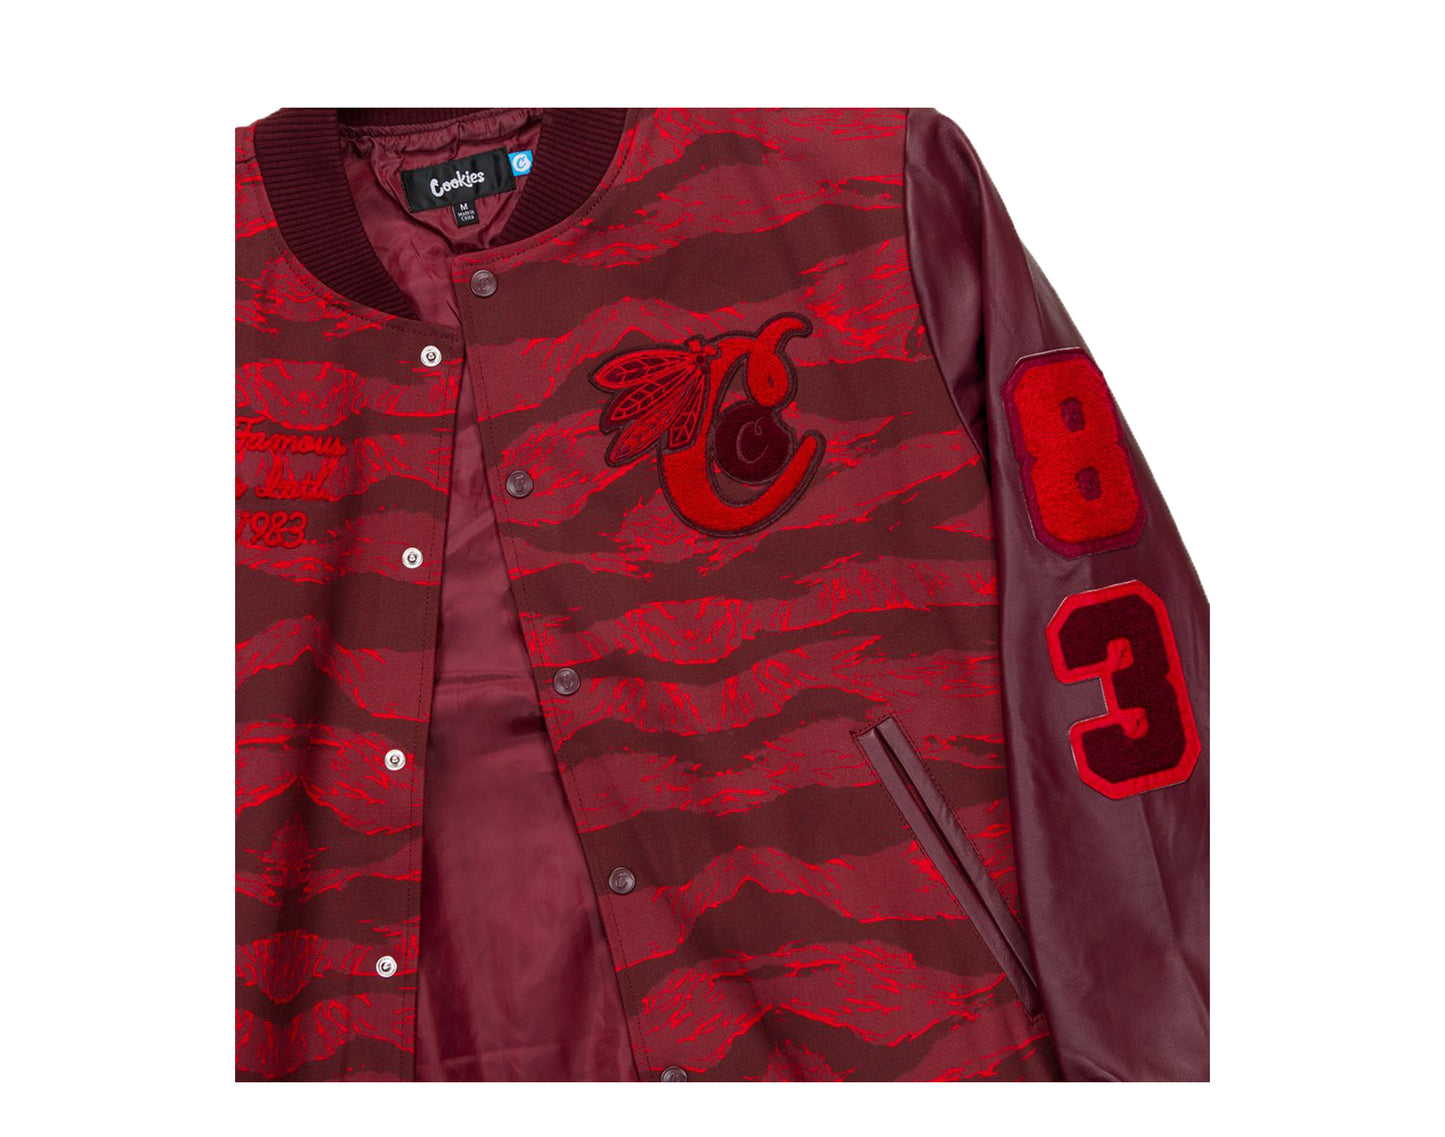 Cookies Top Of The Key Letterman Red Camo Men's Jacket  1546O4342-RED